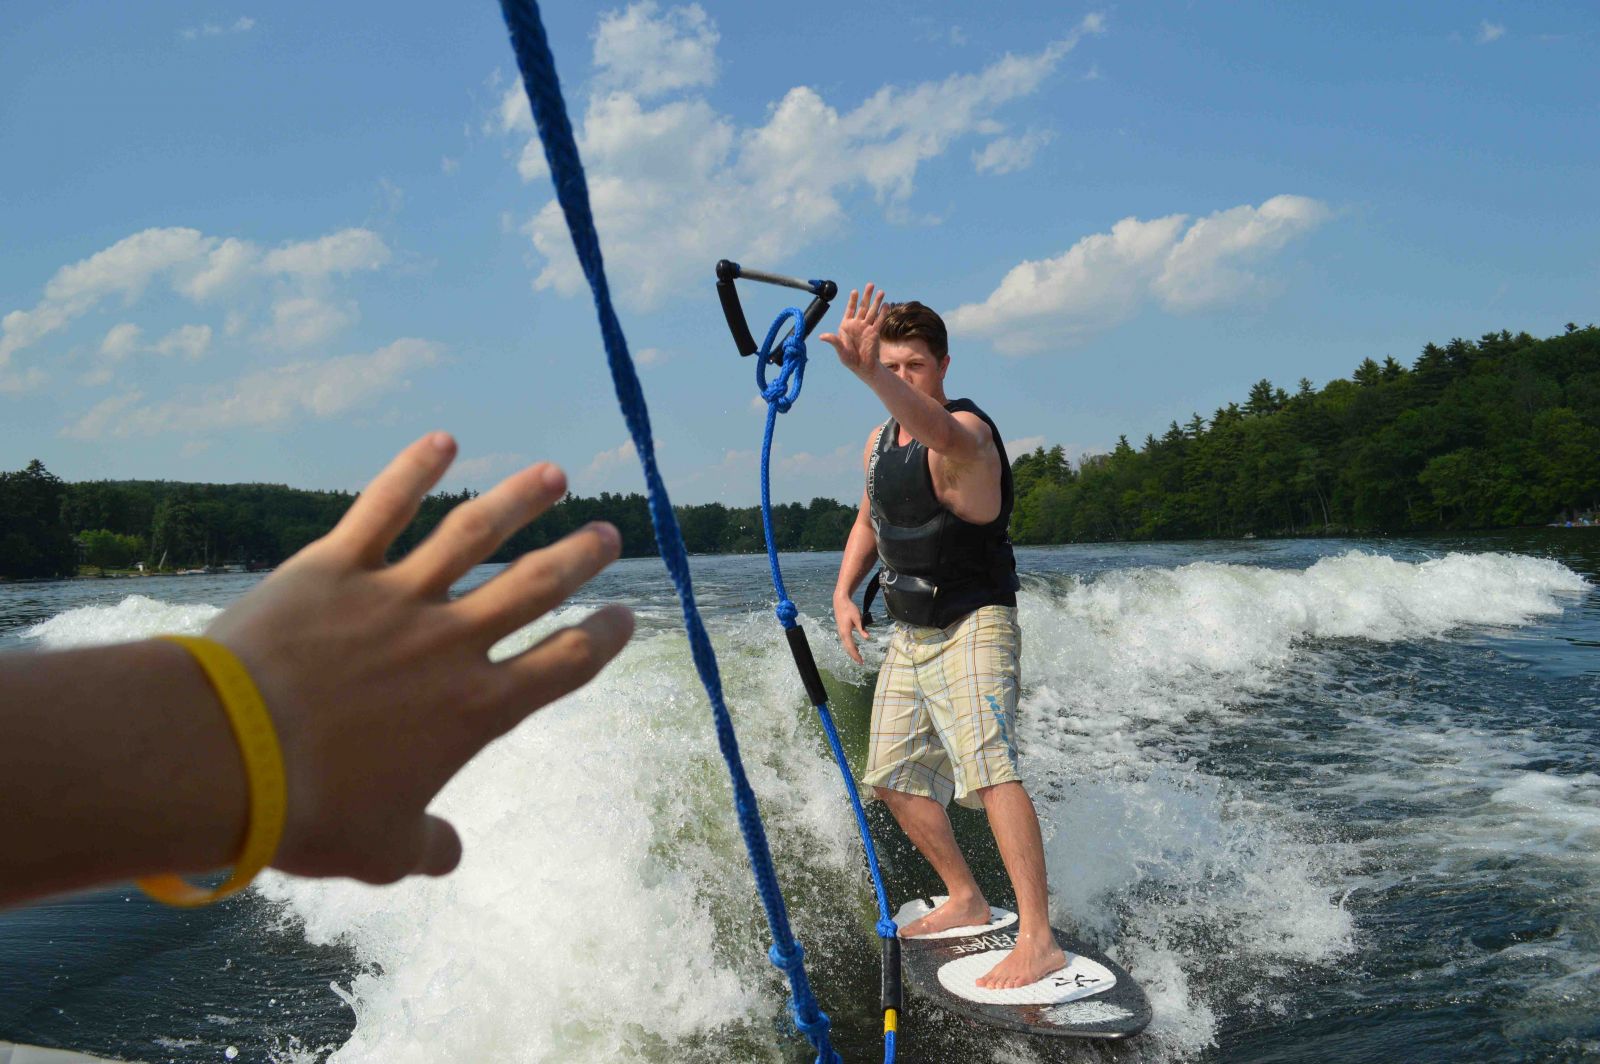 How to wakesurf, throwing the rope in